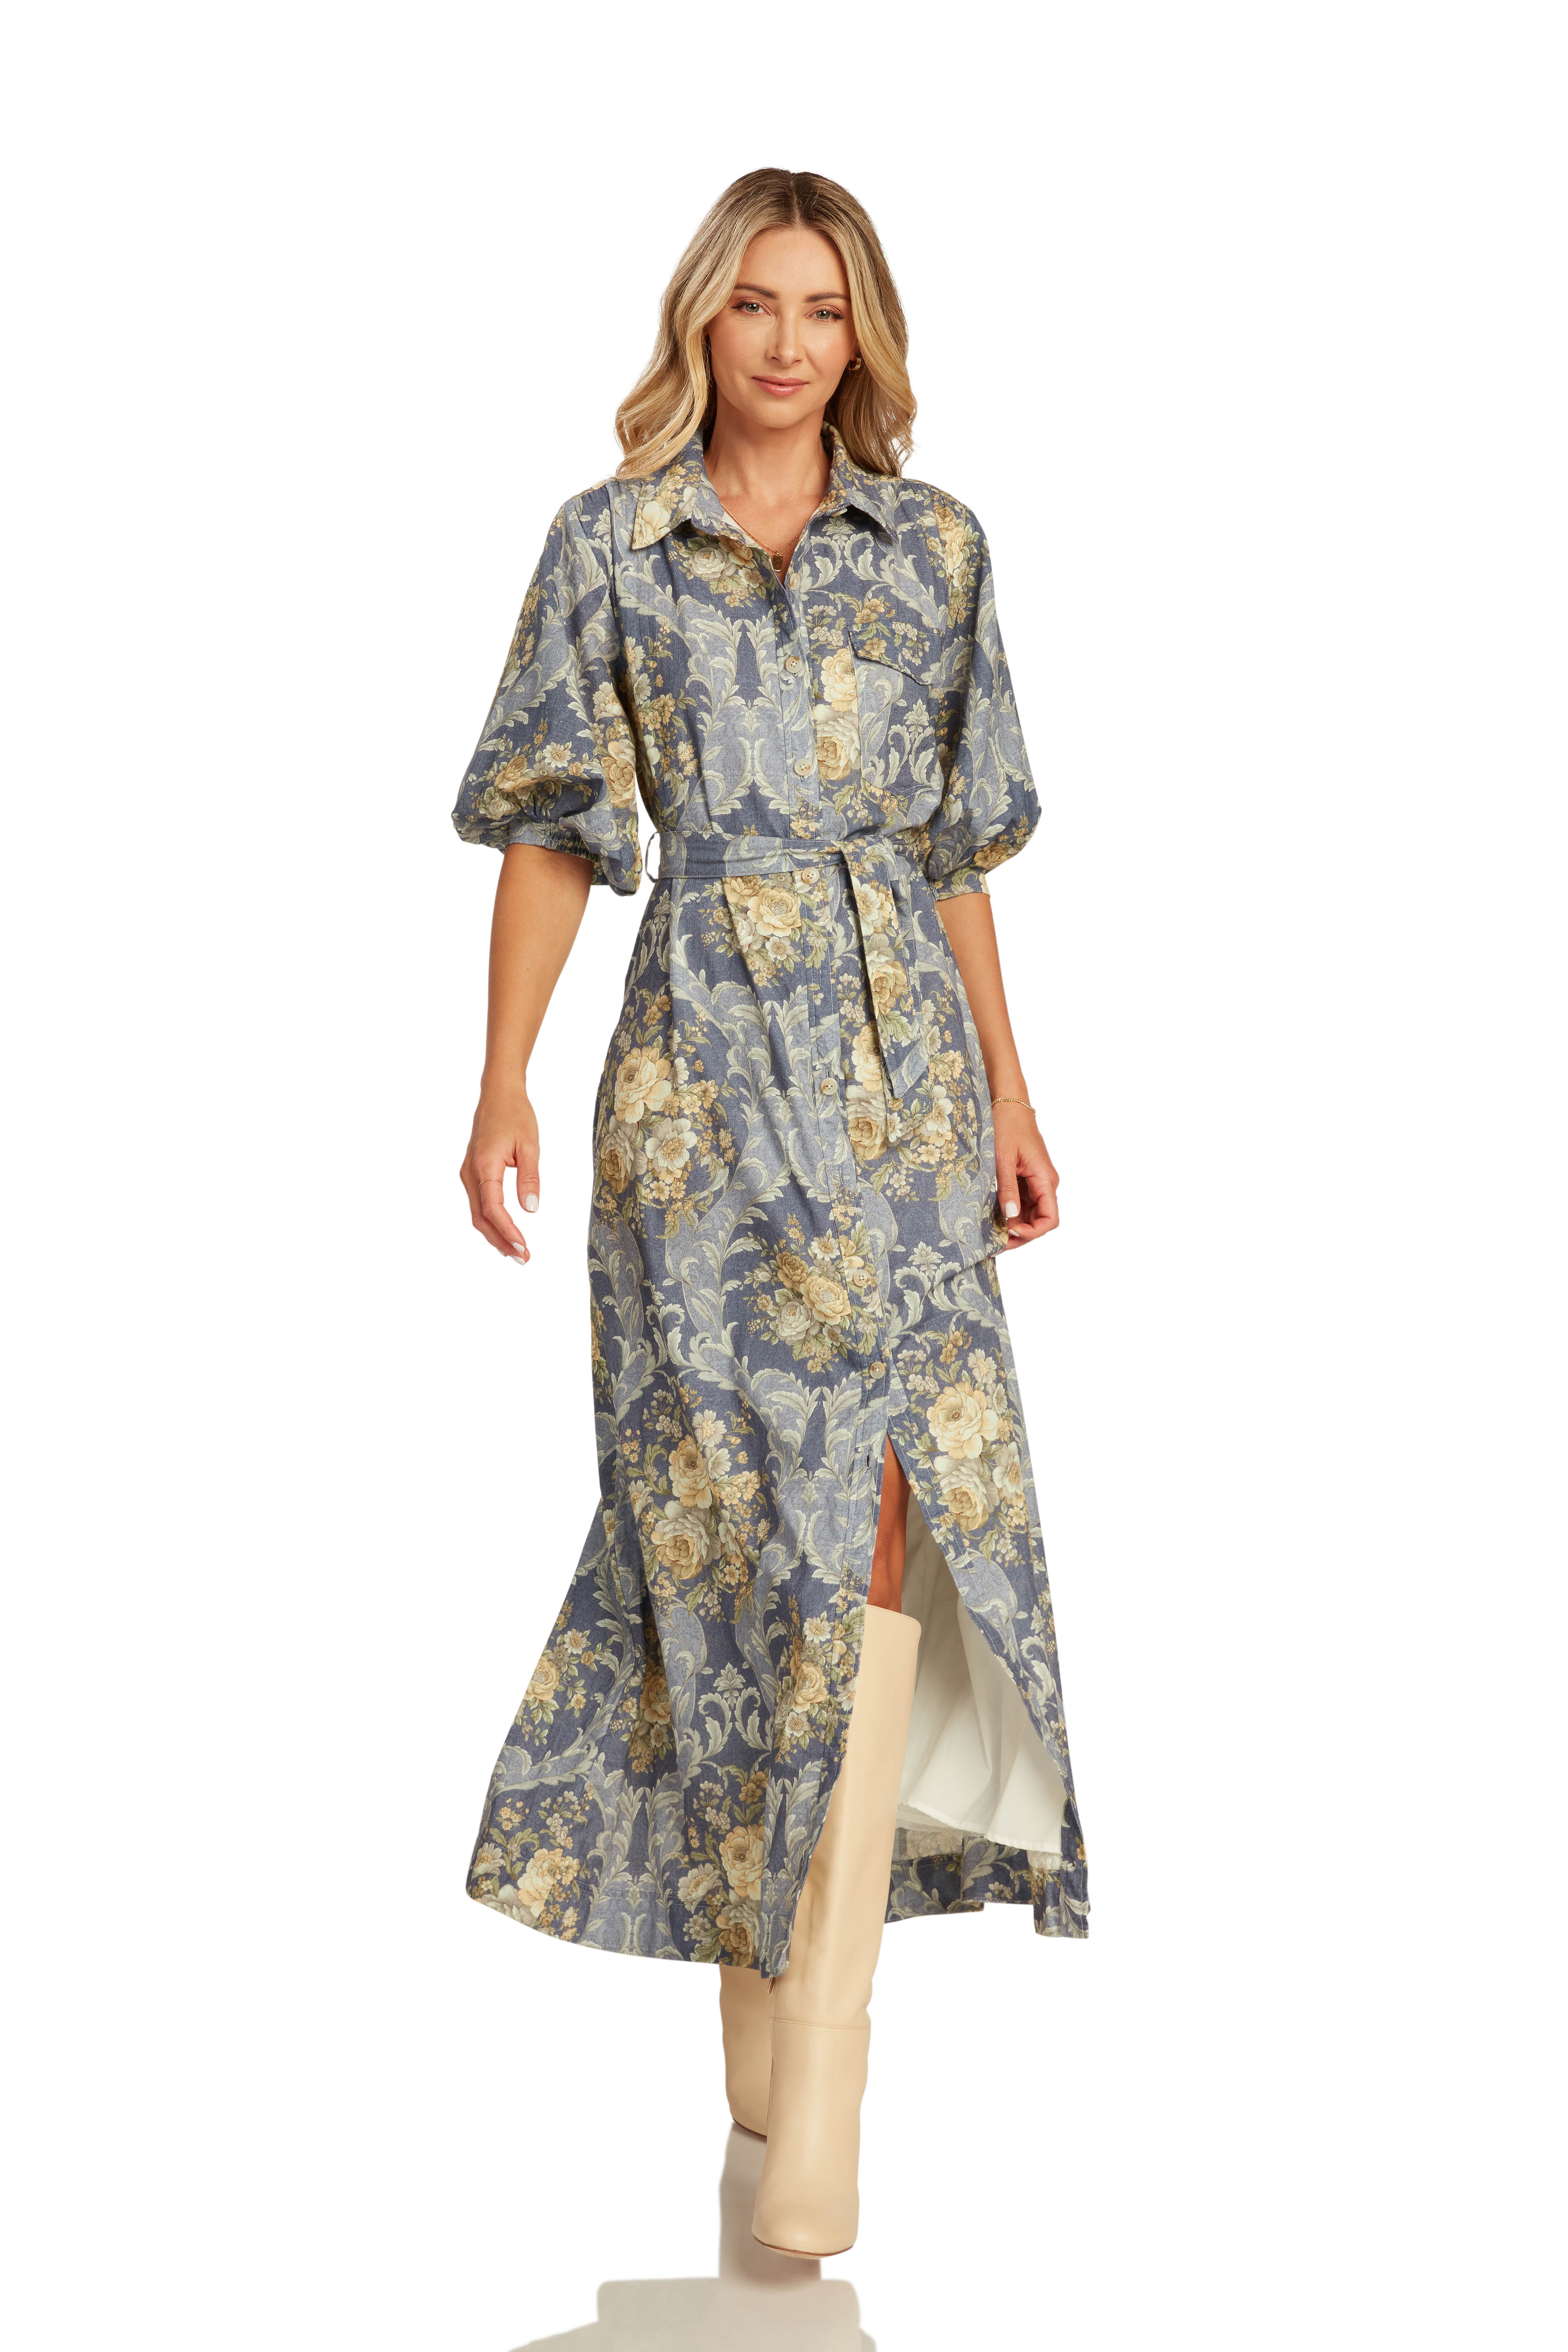 SPRING DRESS EVENT FARLEIGH DRESS FRENCH BLUE FLORAL